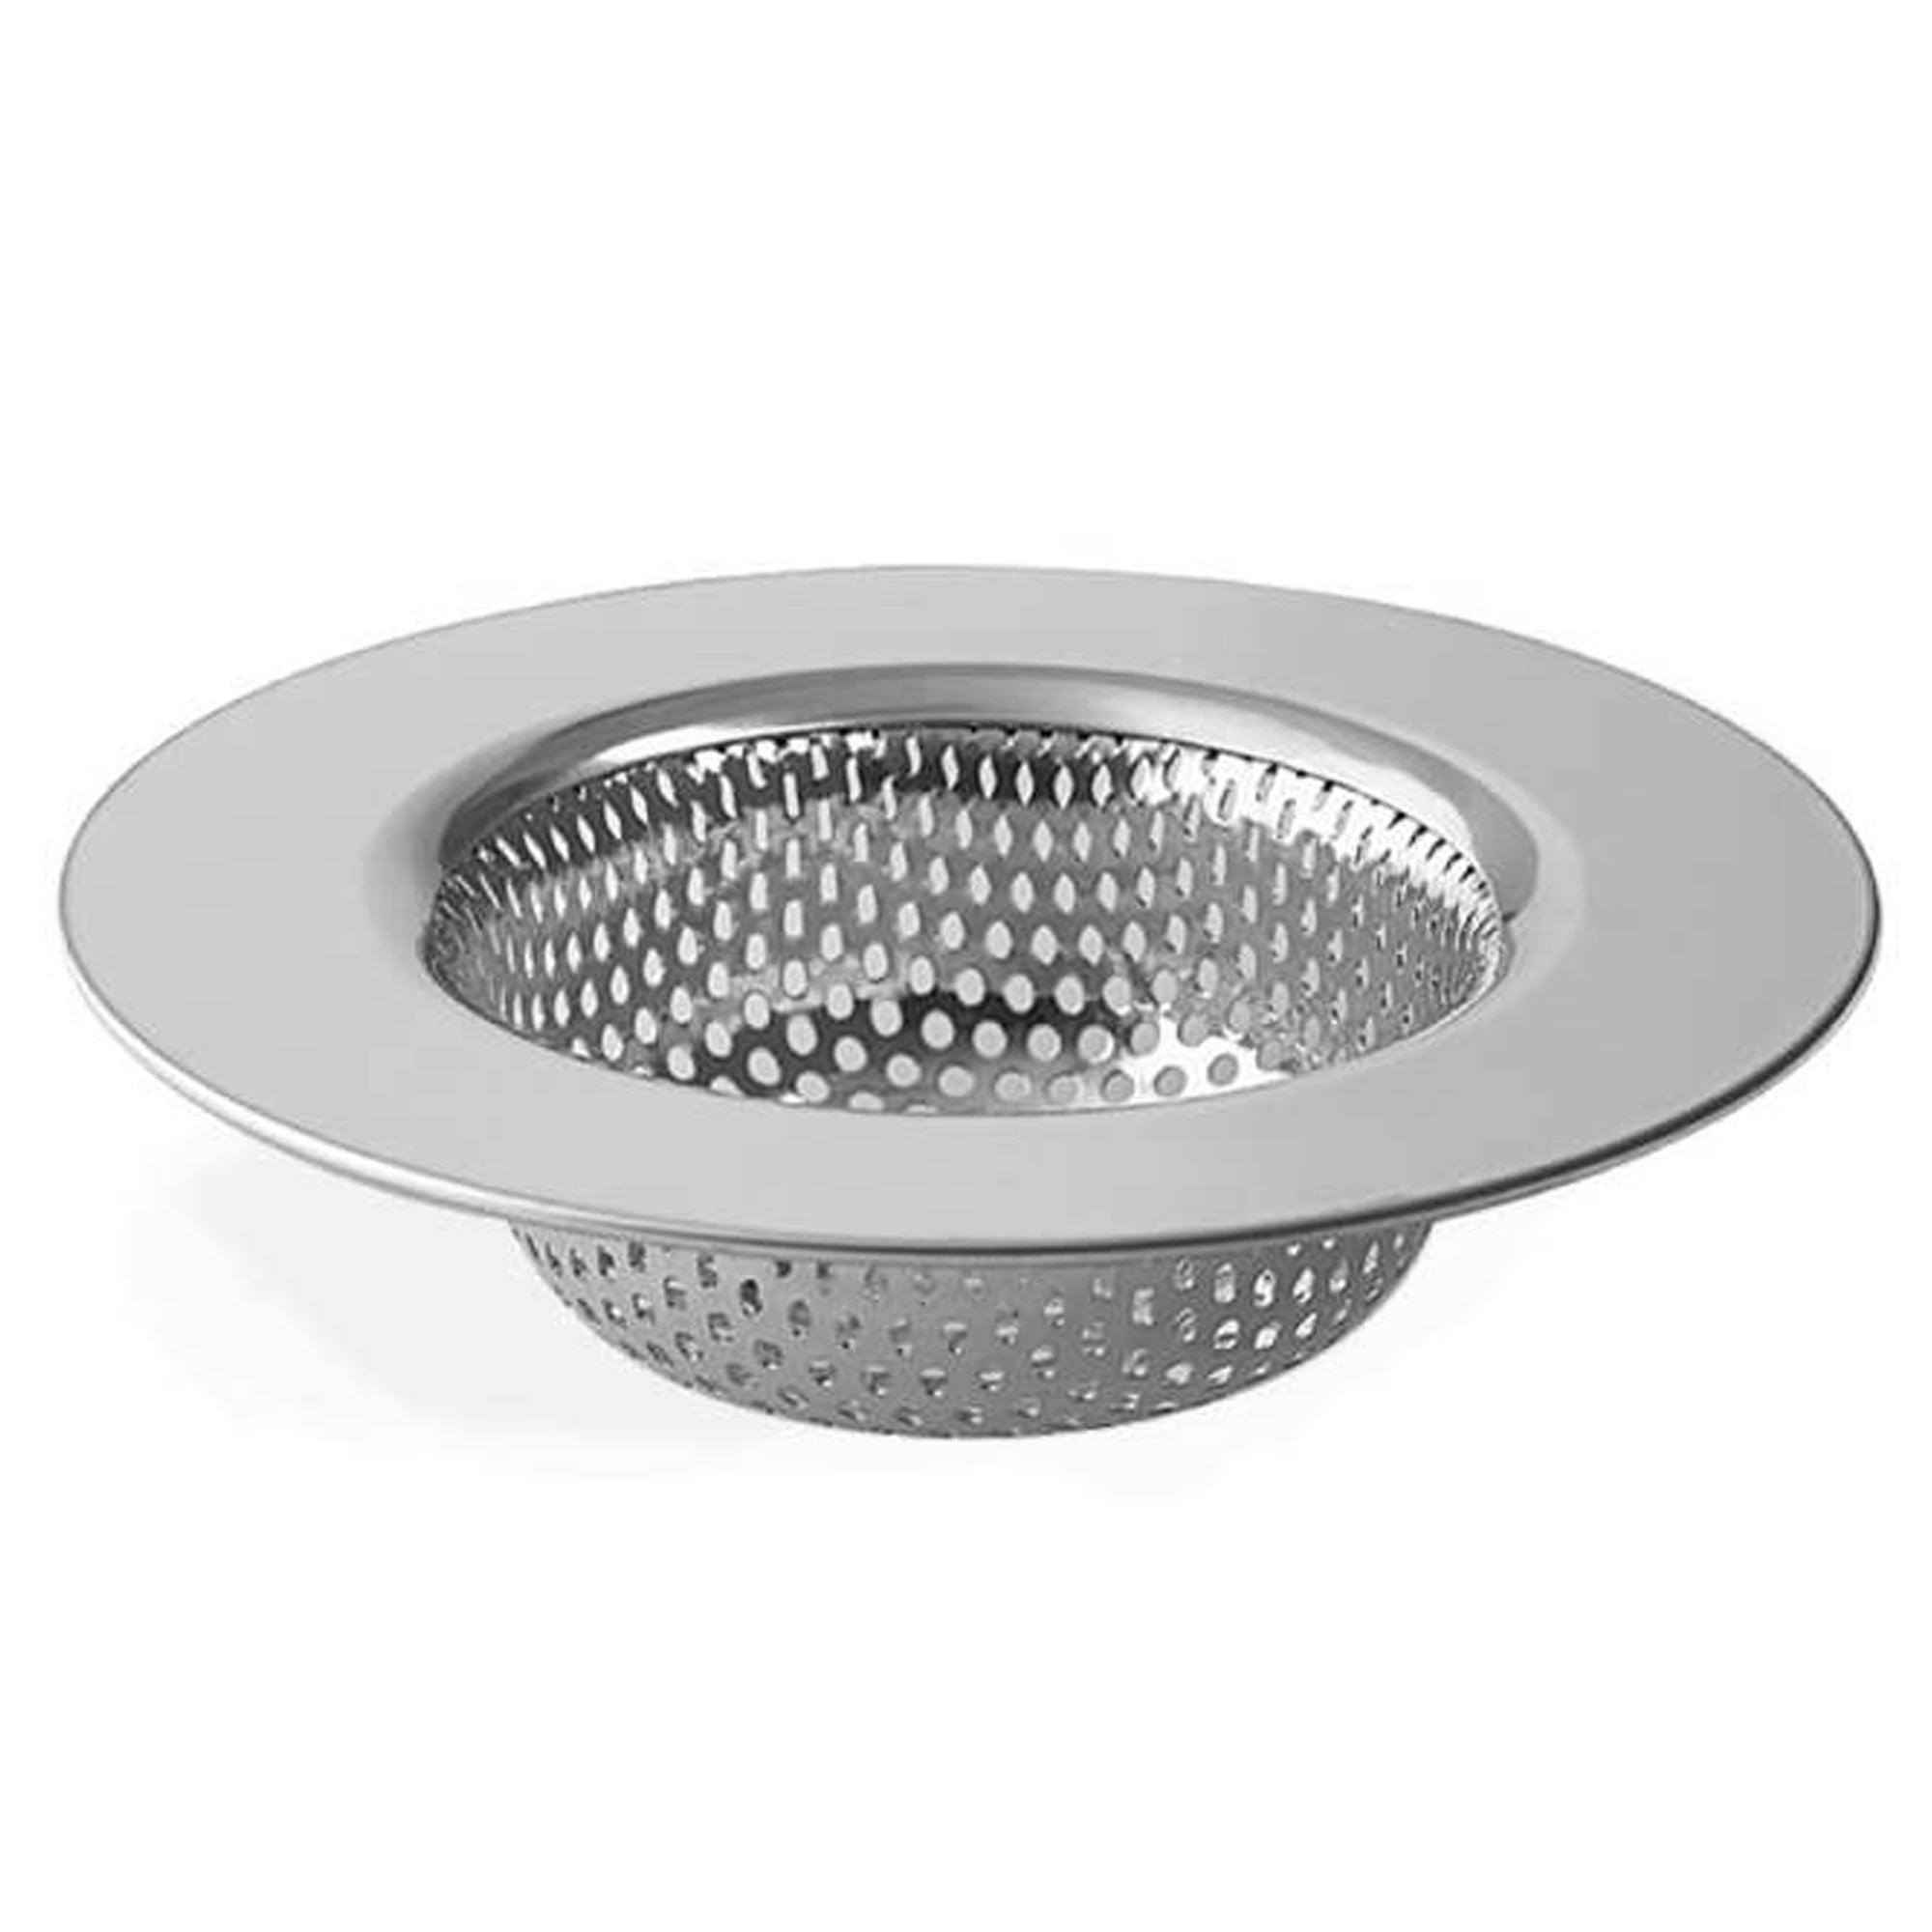 Peerless stainless stell mesh strainer, 2pc. Fits most bathroom sinks and  tub drains.